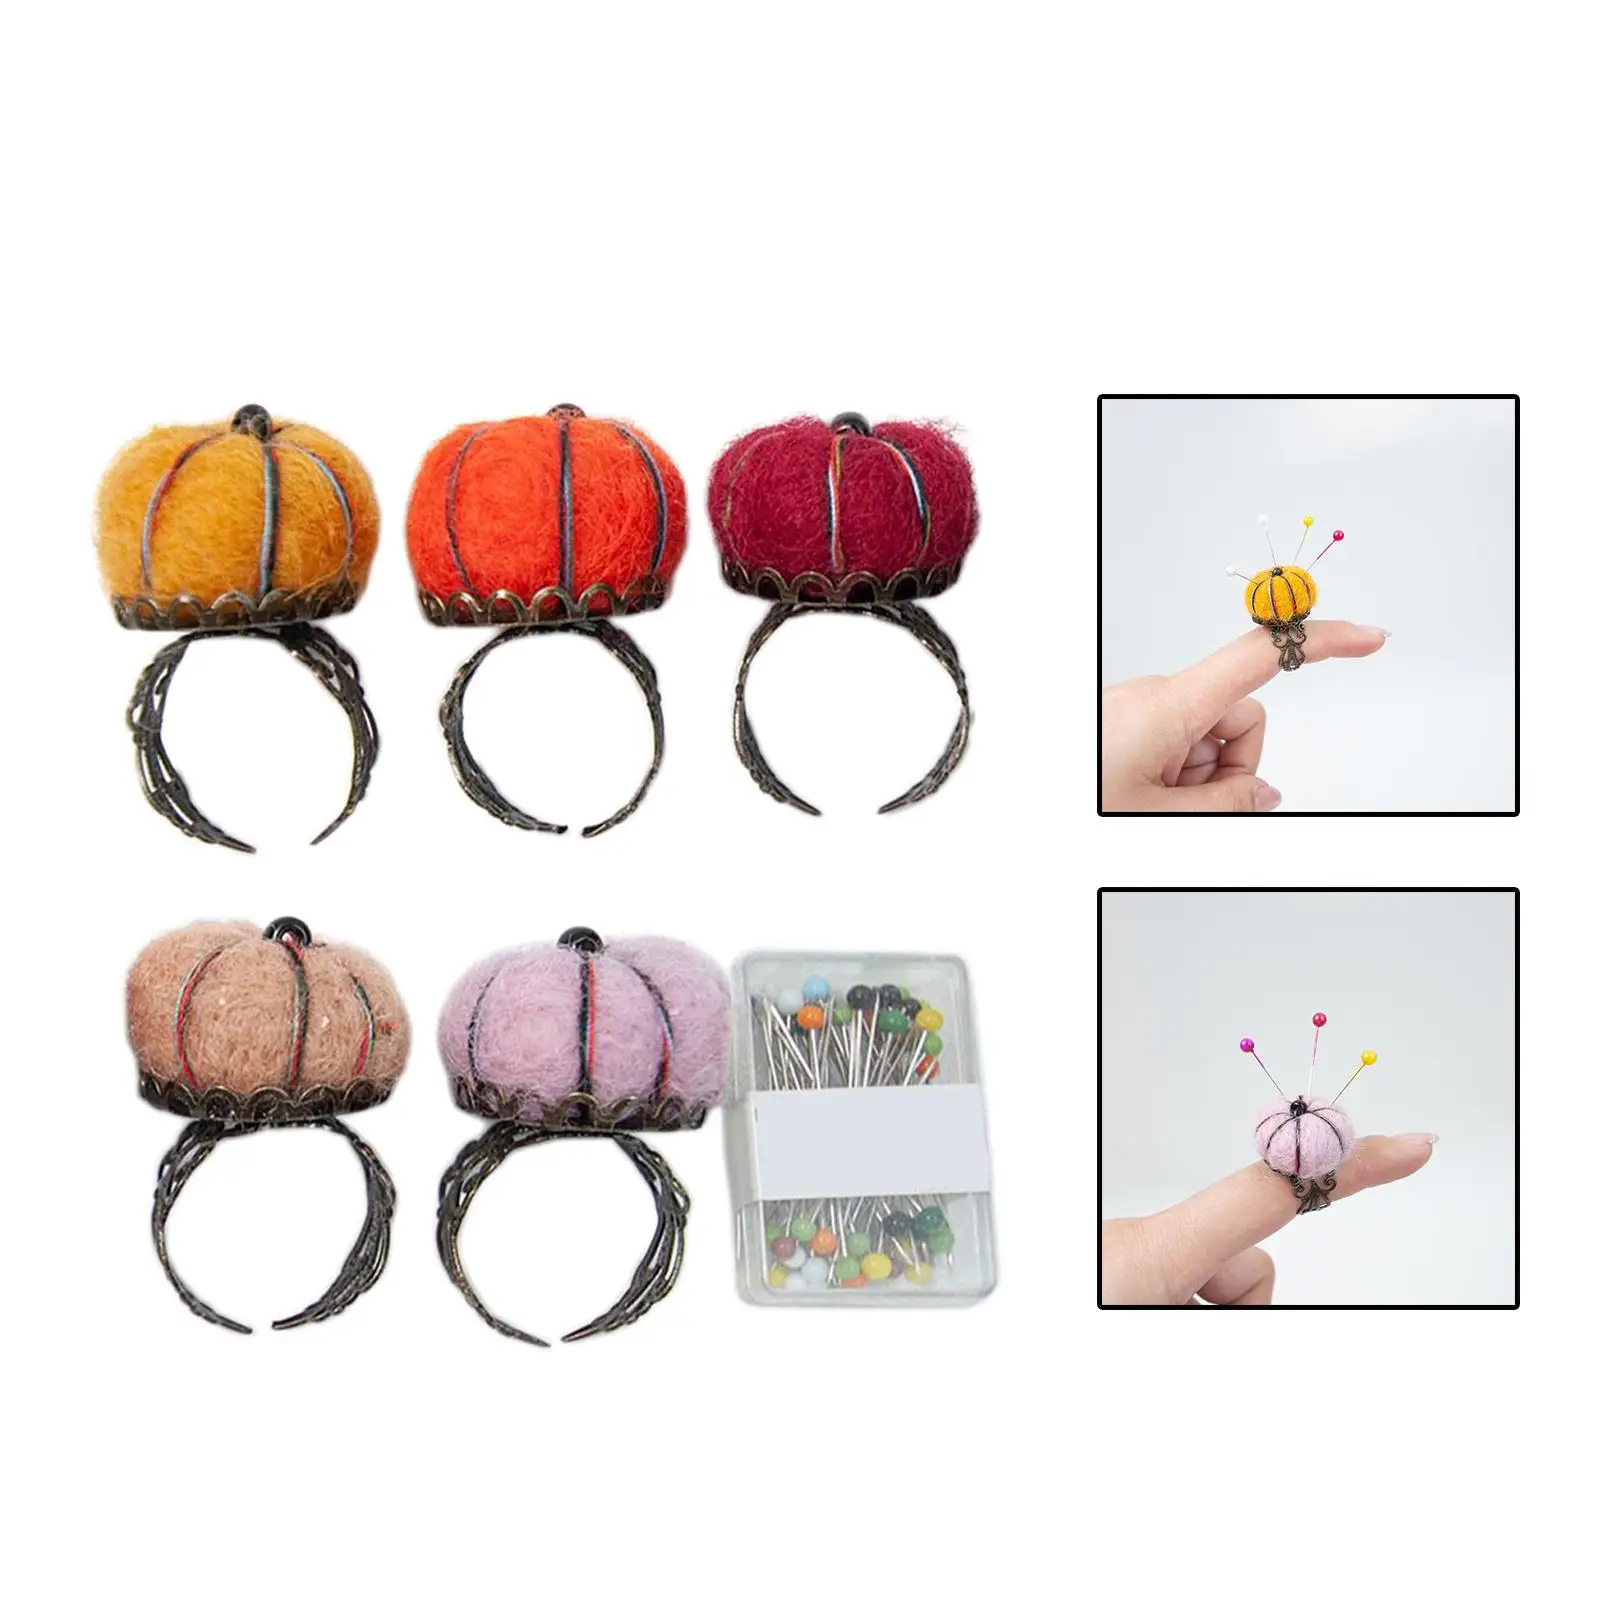 5x Felt Pincushions Sewing Supply Insert Pin Cushion Assorted Color Handcraft Cute Pumpkin Shaped for Quilting Sewing Accessory